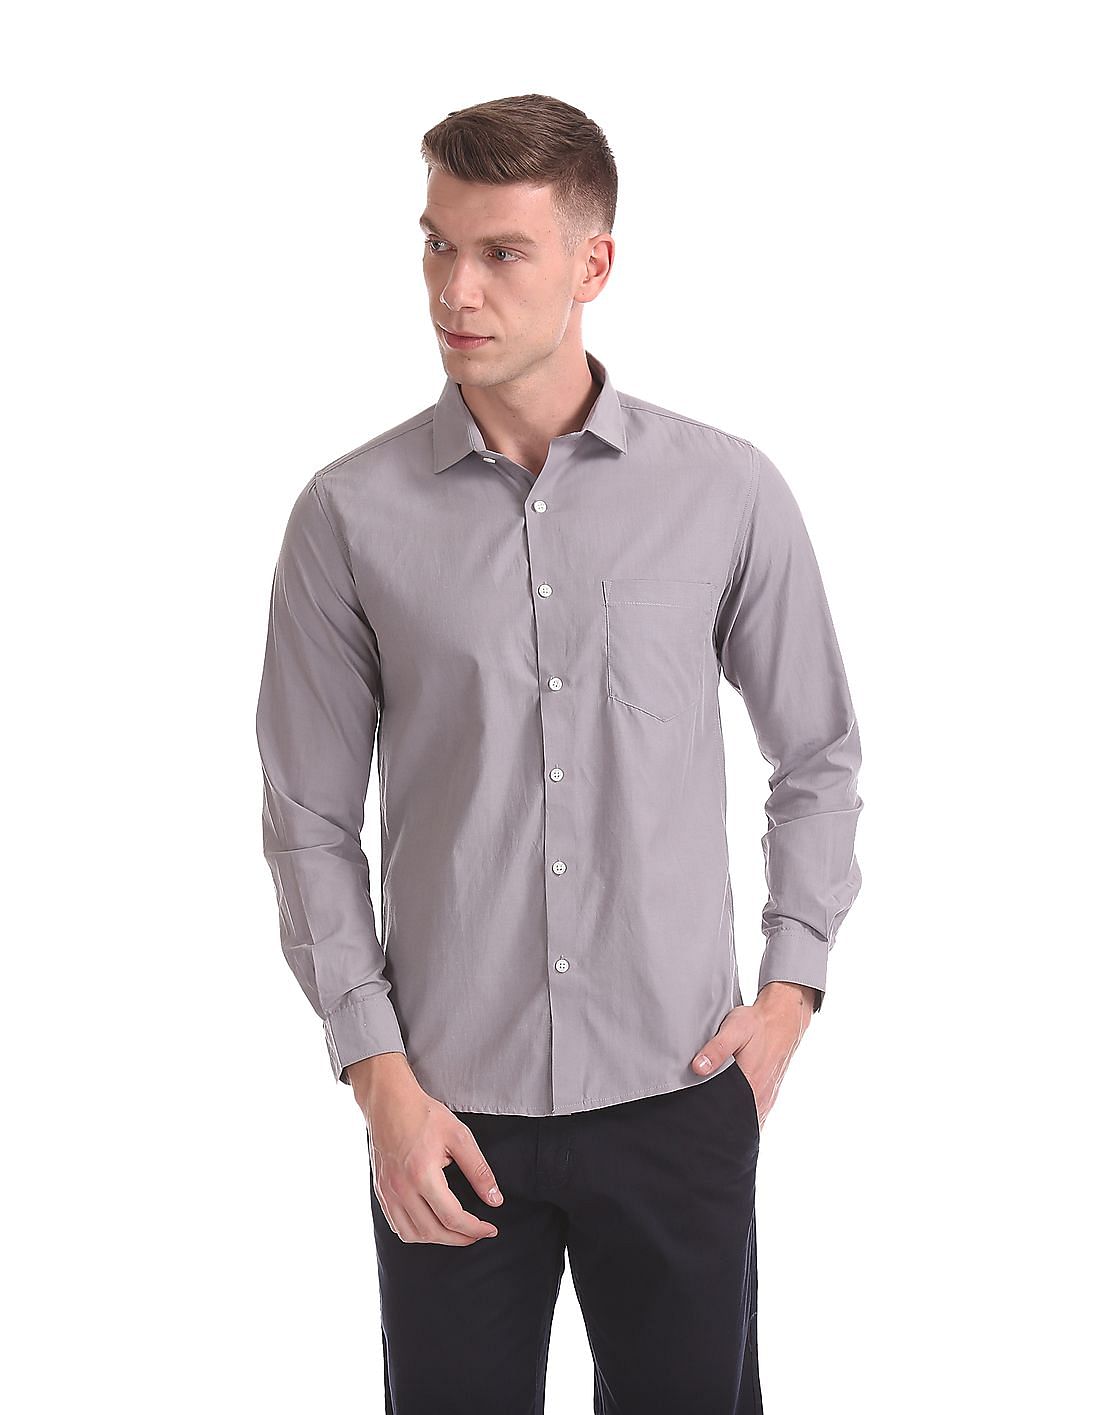 Buy Excalibur Regular Fit French Placket Shirt - NNNOW.com